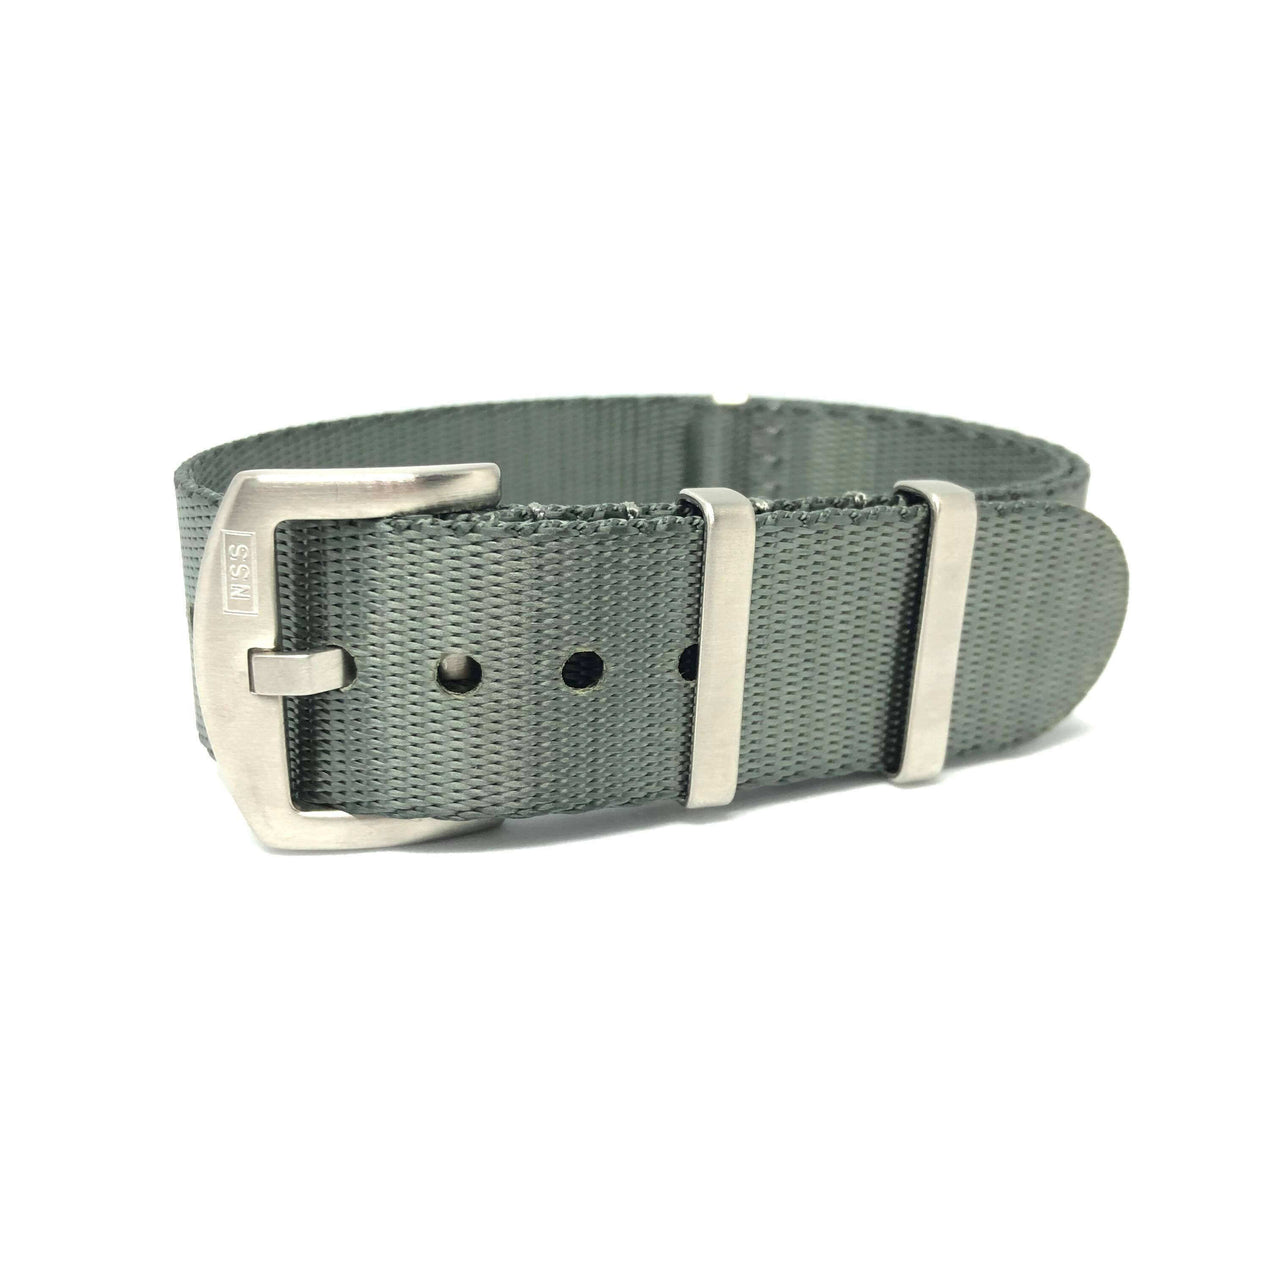 Premium Thick Woven Military Style Watch Strap - Grey